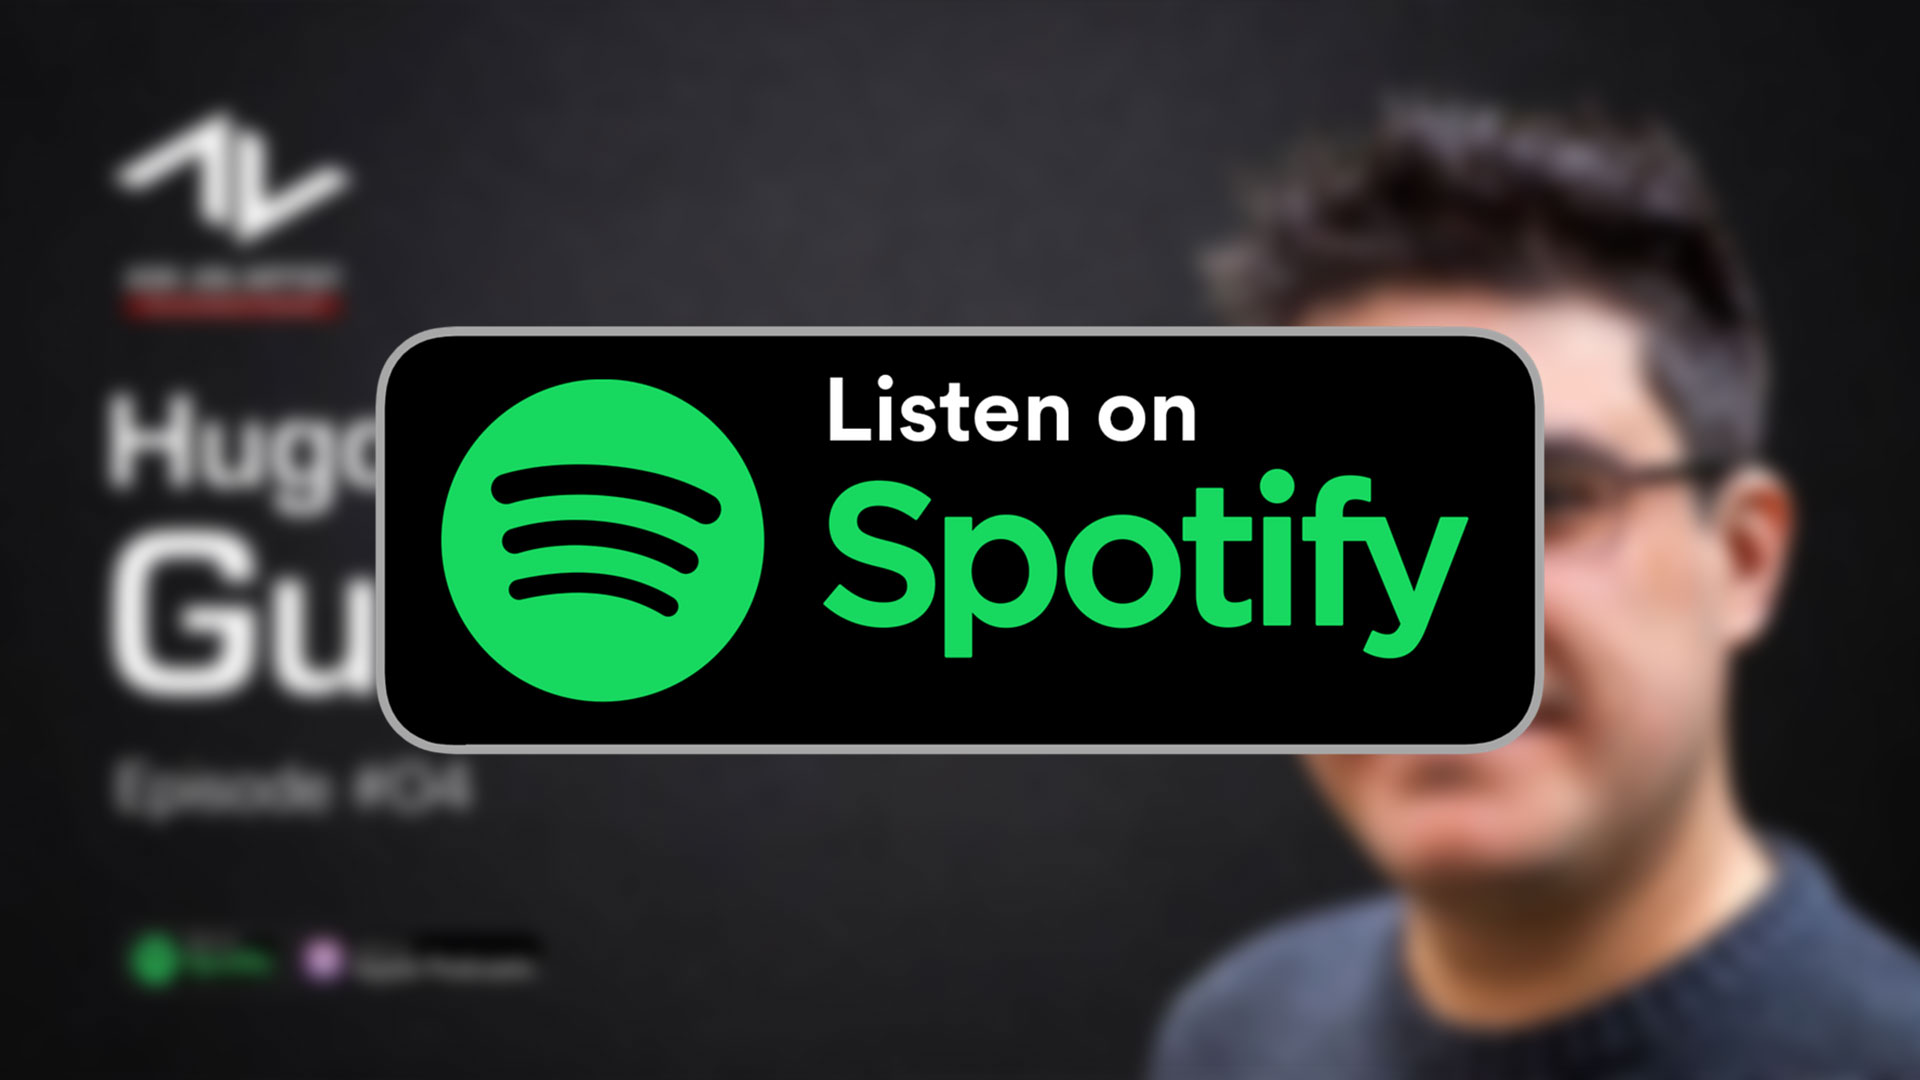 Listen to episode four with Hugo Guerra on Spotify.